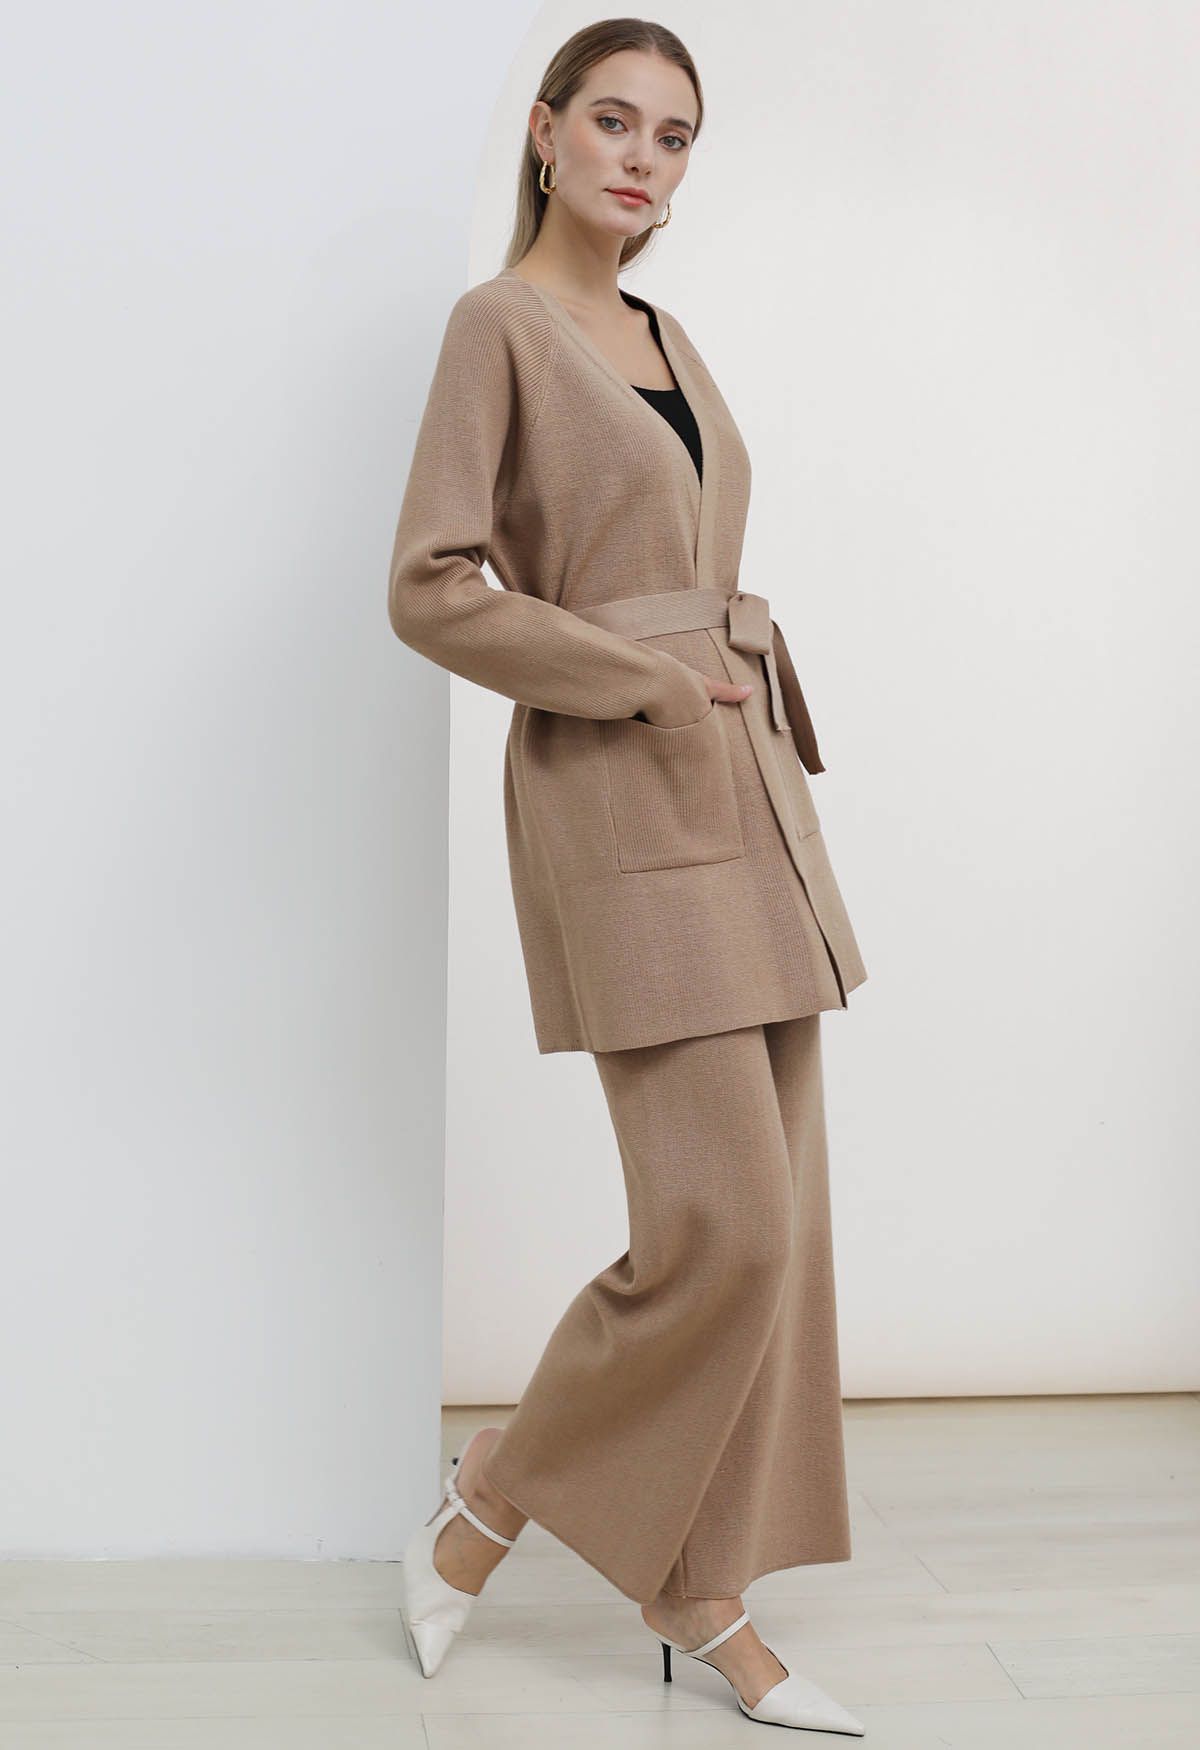 Tie-Waist Knit Cardigan and Pants Set in Camel